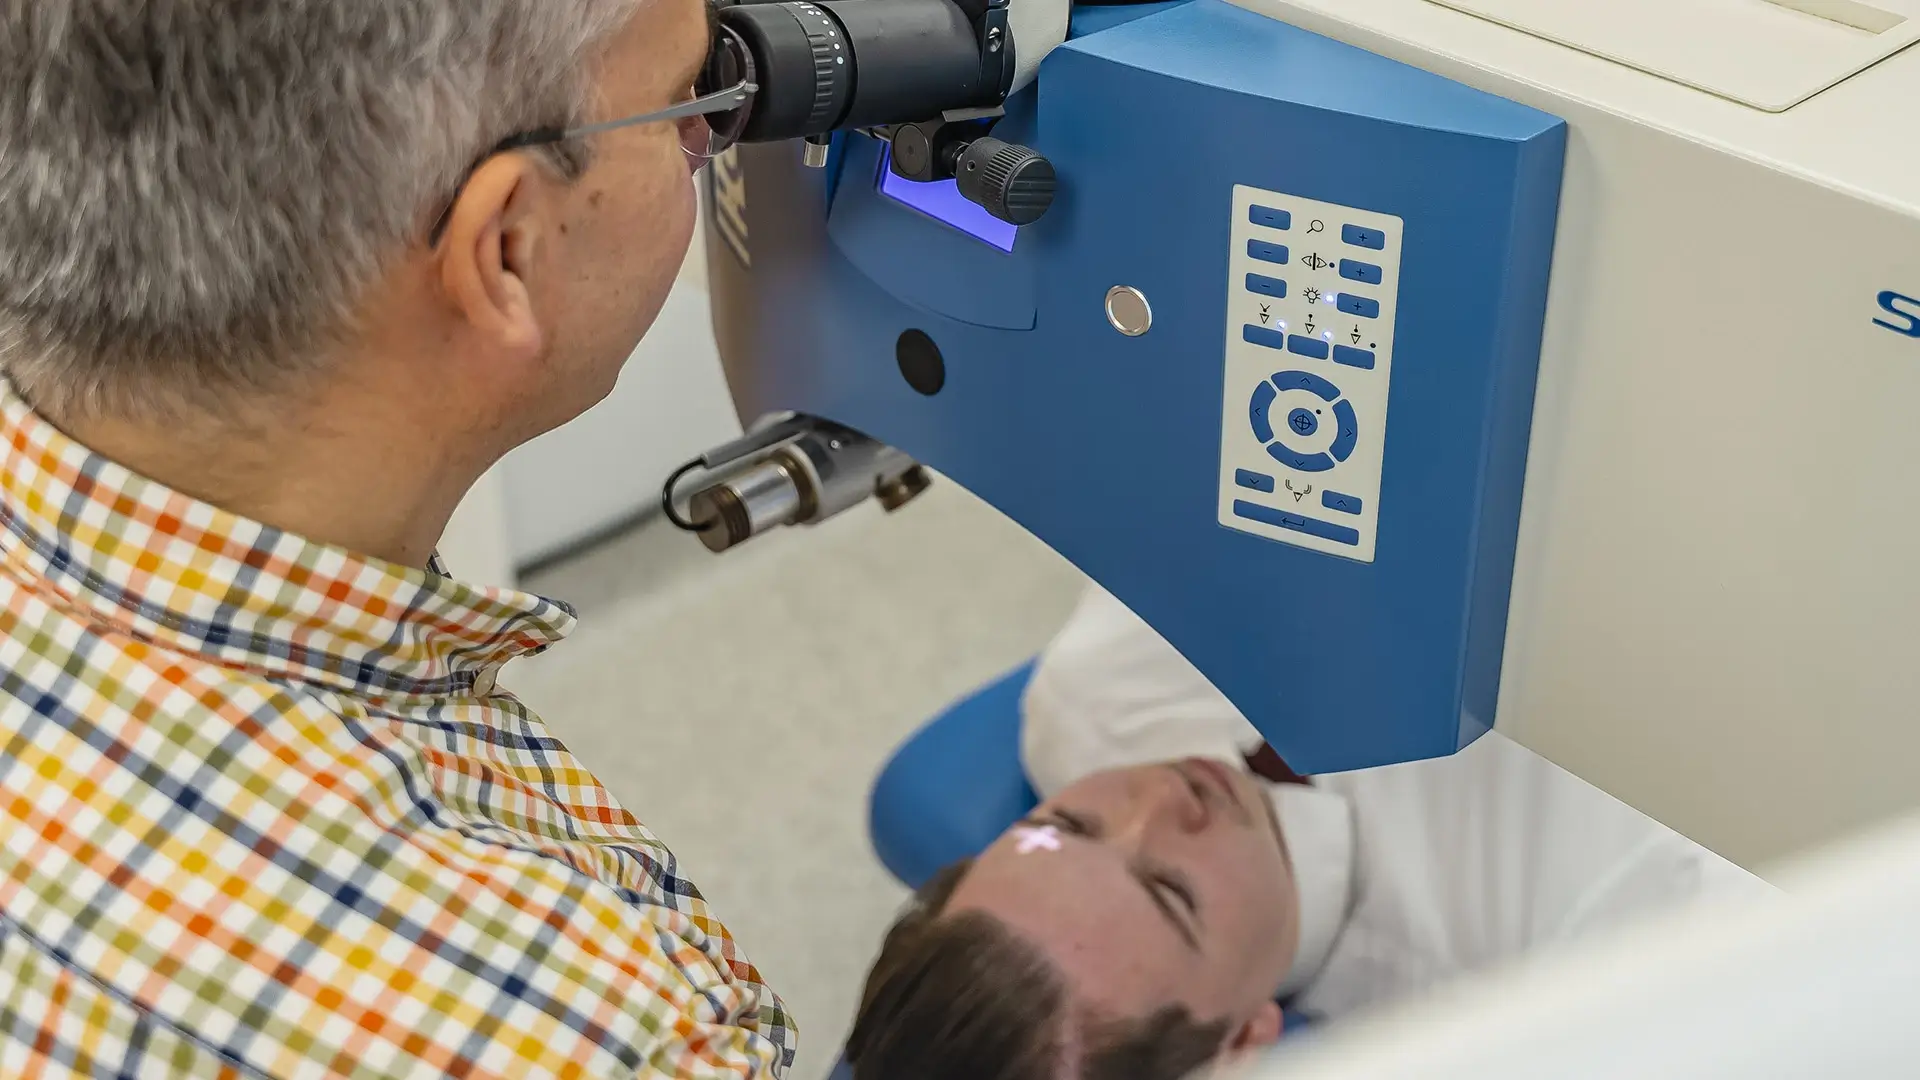 Excimer laser surgery to correct long-sight, short-sight and astigmatism